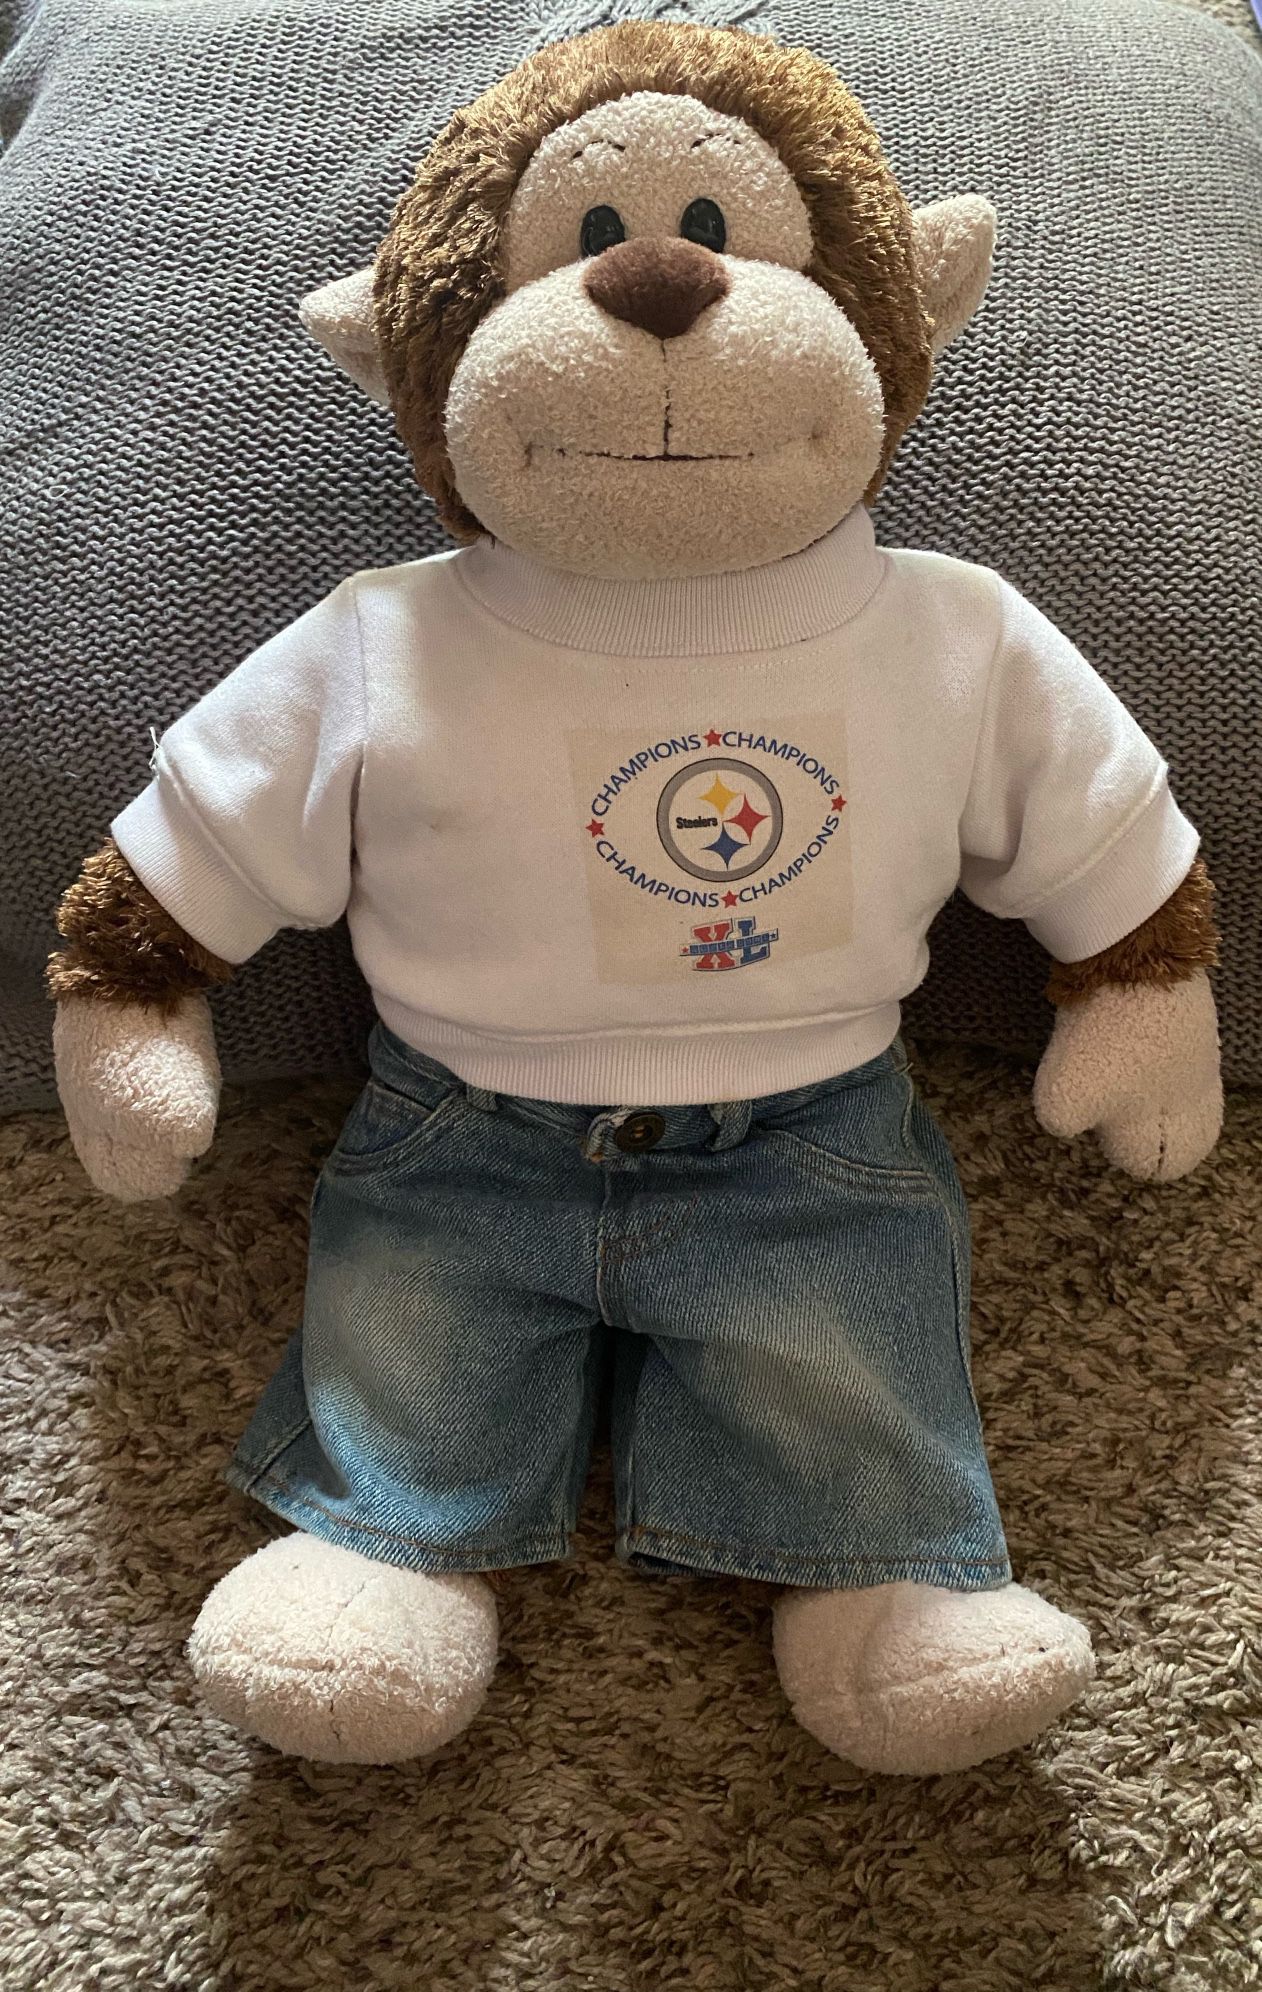 VINTAGE 17 1/2 Inch Build-A-Bear Bear with Removeable Champions Super Bowl Outfit